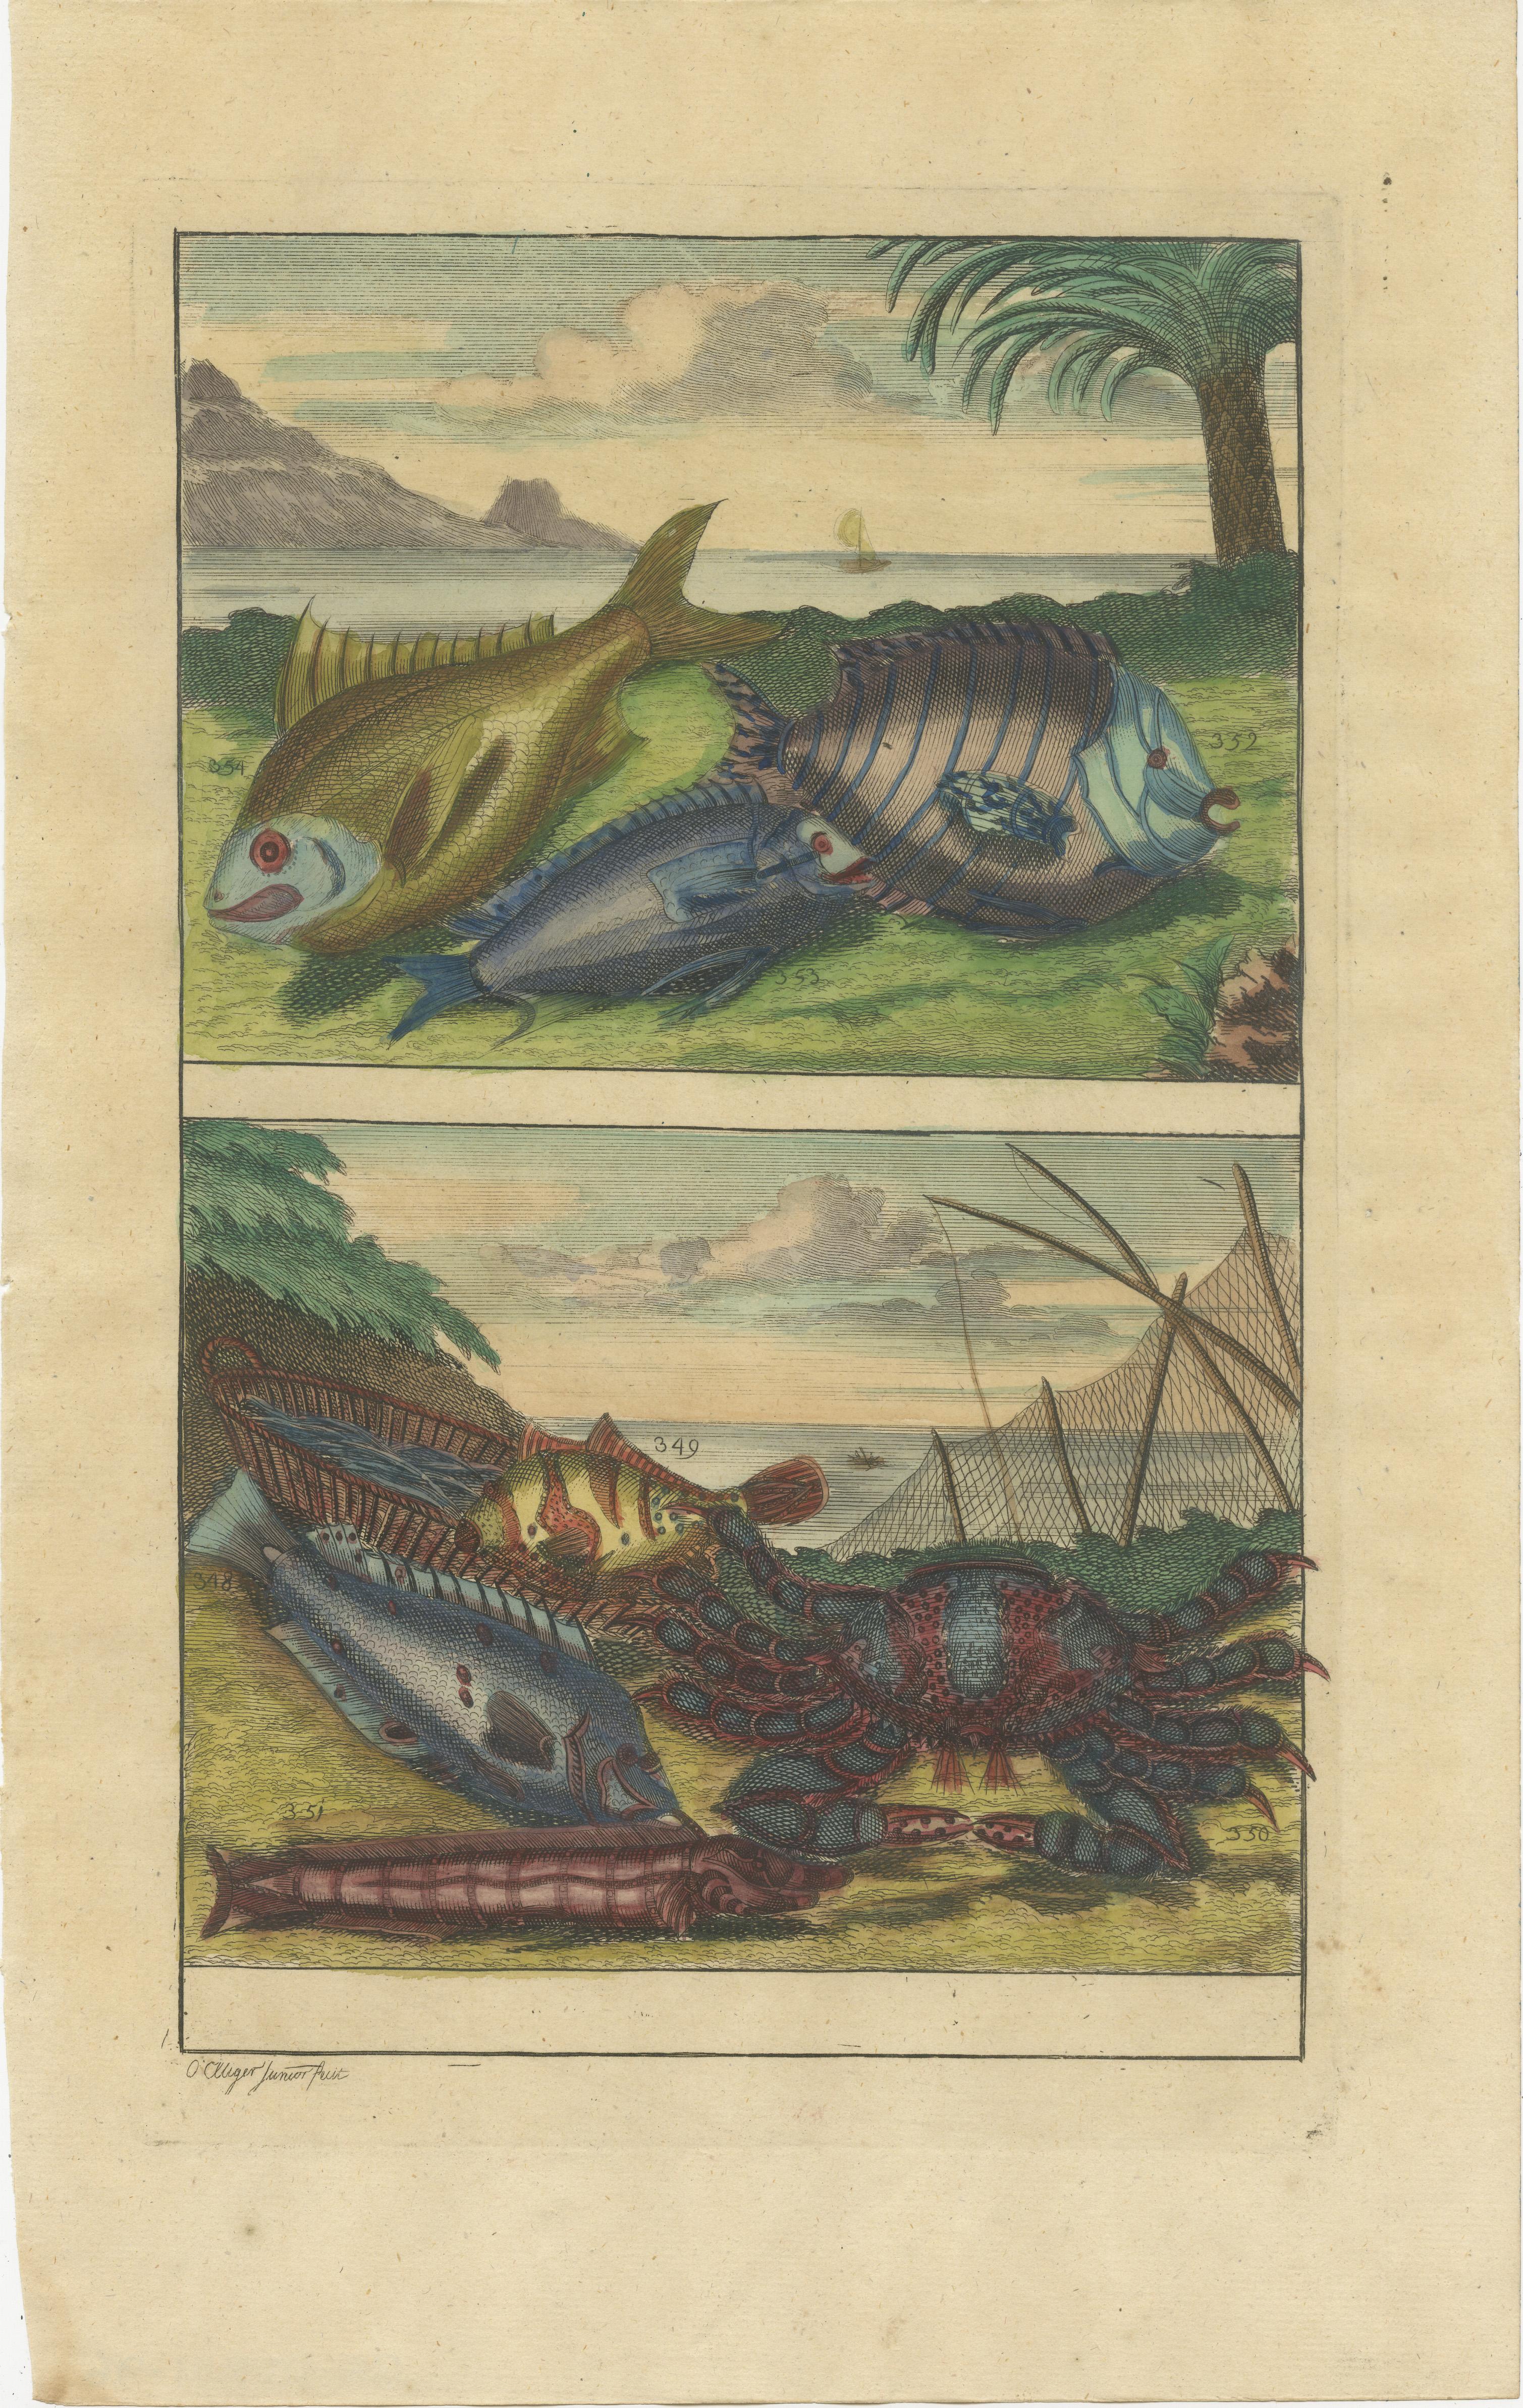 Set of two antique prints of various fishes and crustaceans. These print originate from 'Oud en Nieuw Oost-Indiën' by F. Valentijn.

François Valentyn or Valentijn (17 April 1666 – 6 August 1727) was a Dutch Calvinist minister, naturalist and